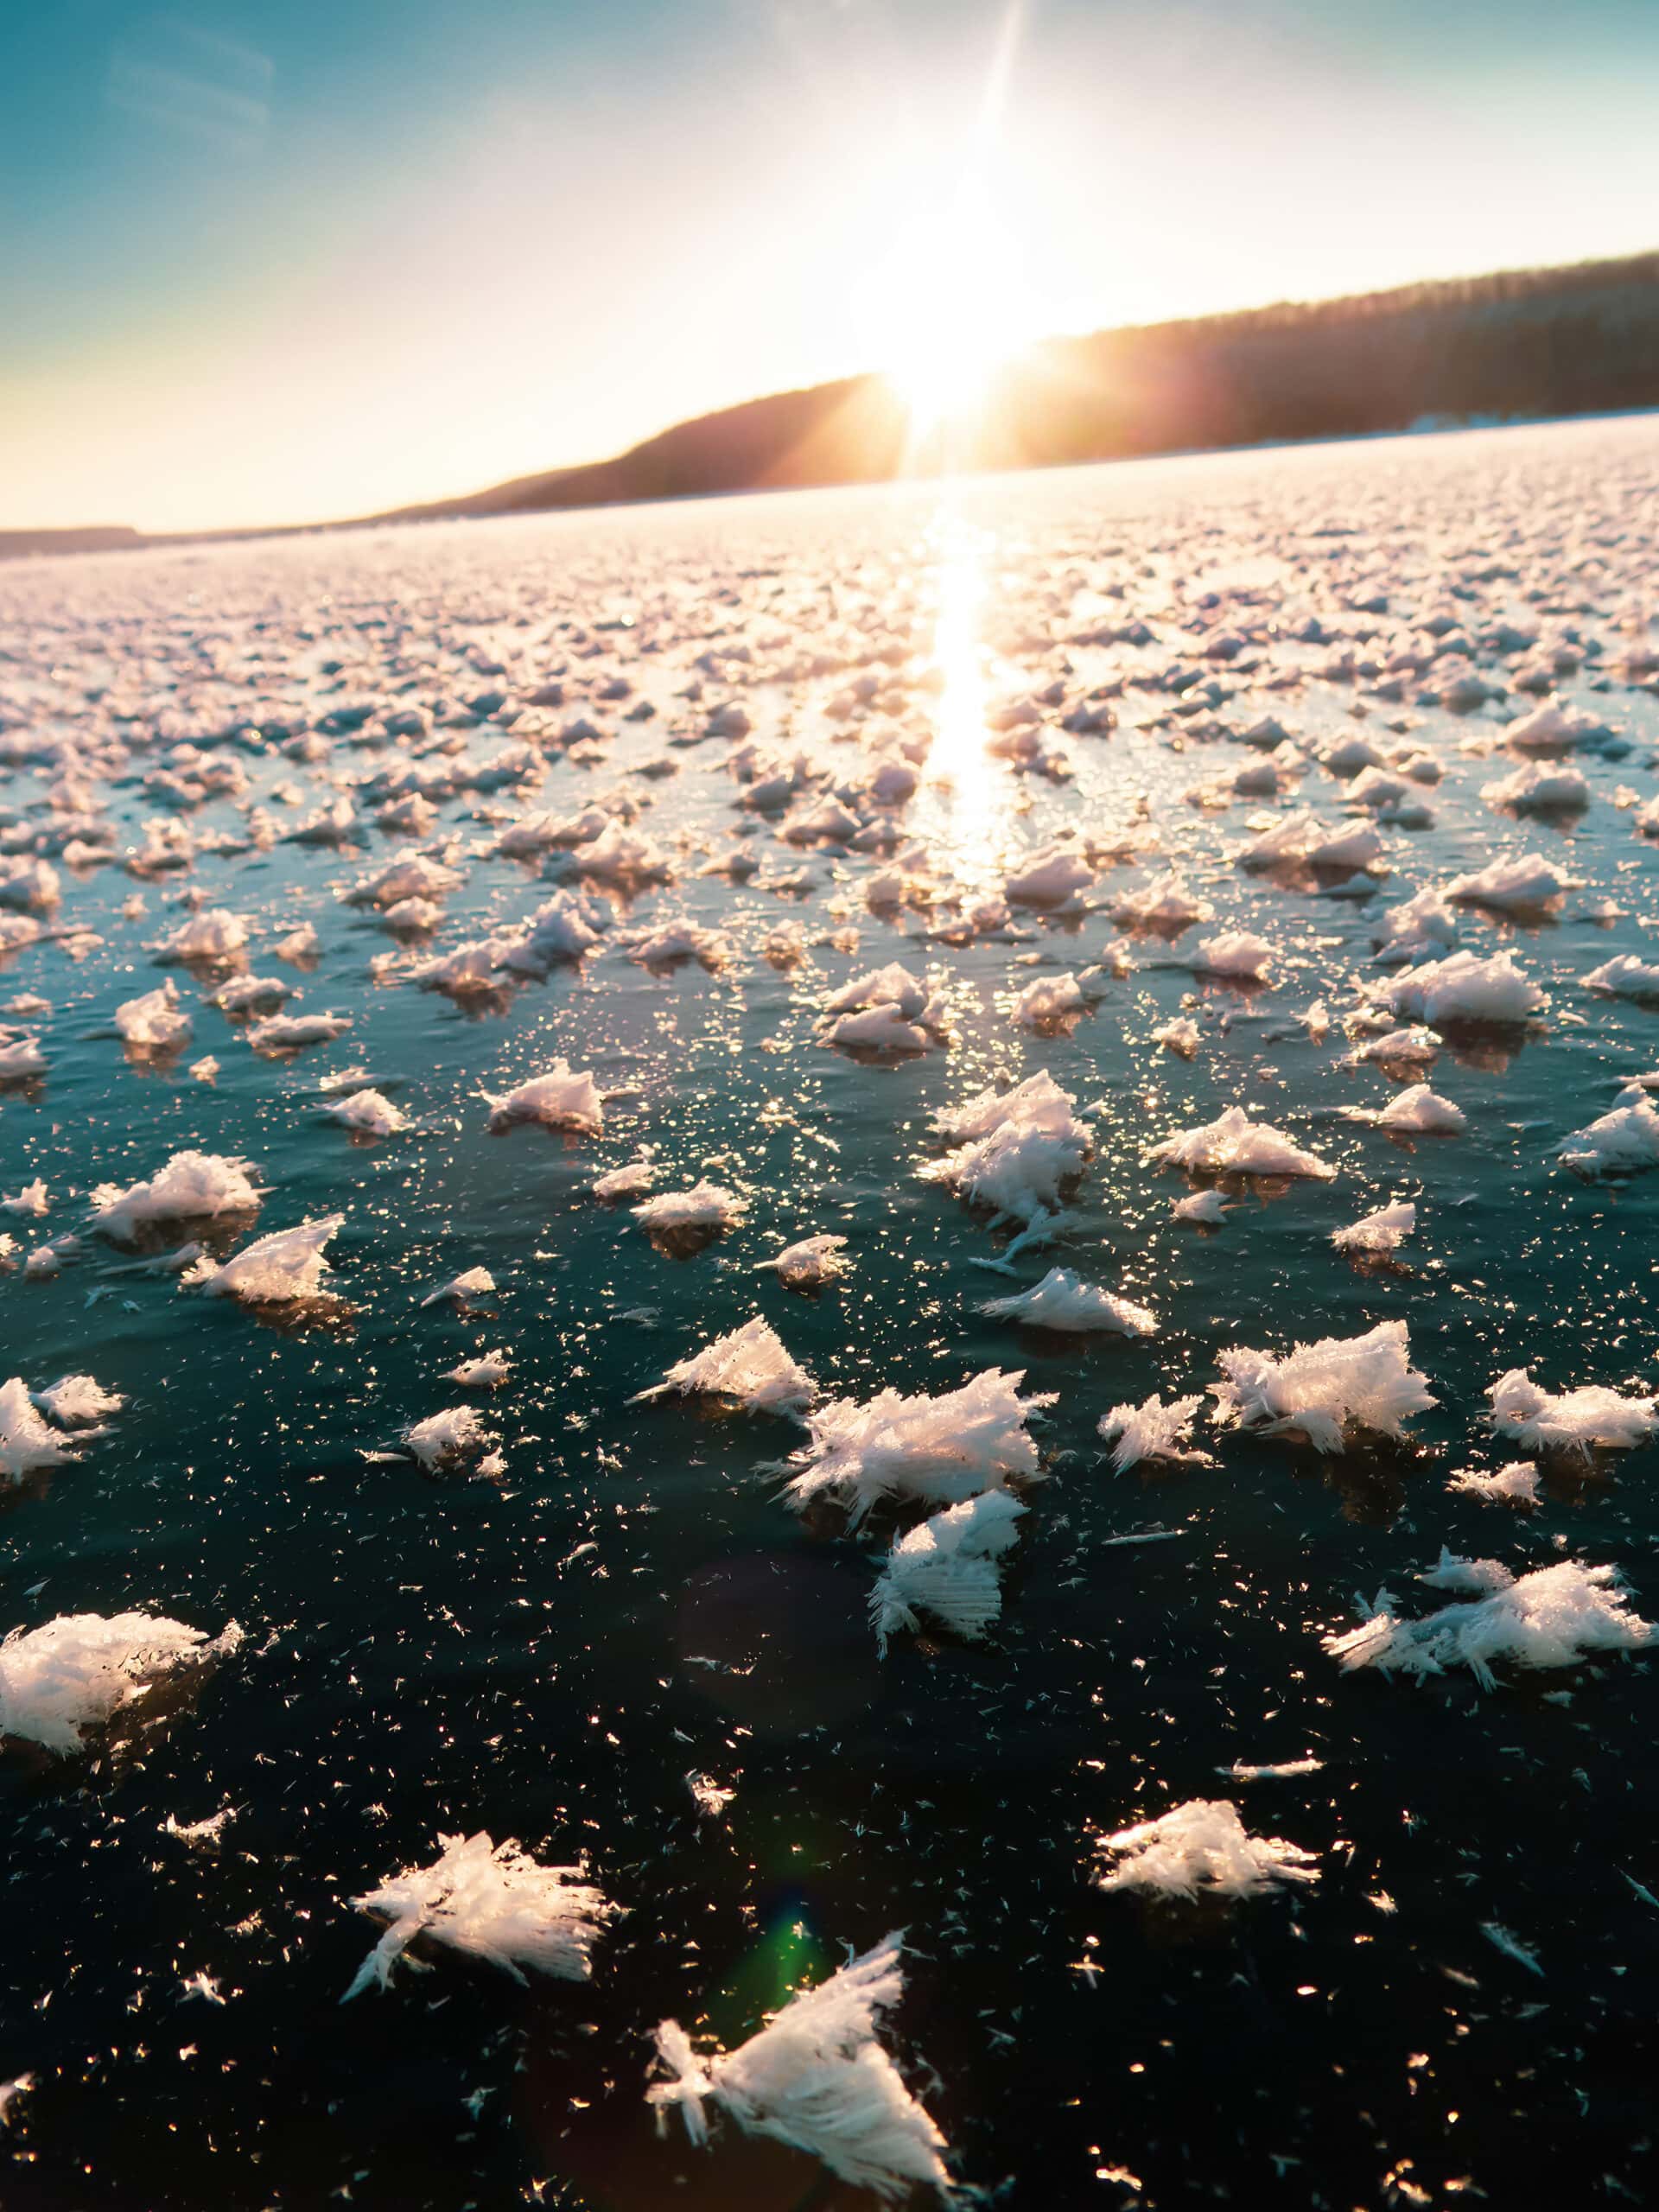 Frost flowers sit on the glassy surface of the frozen lake